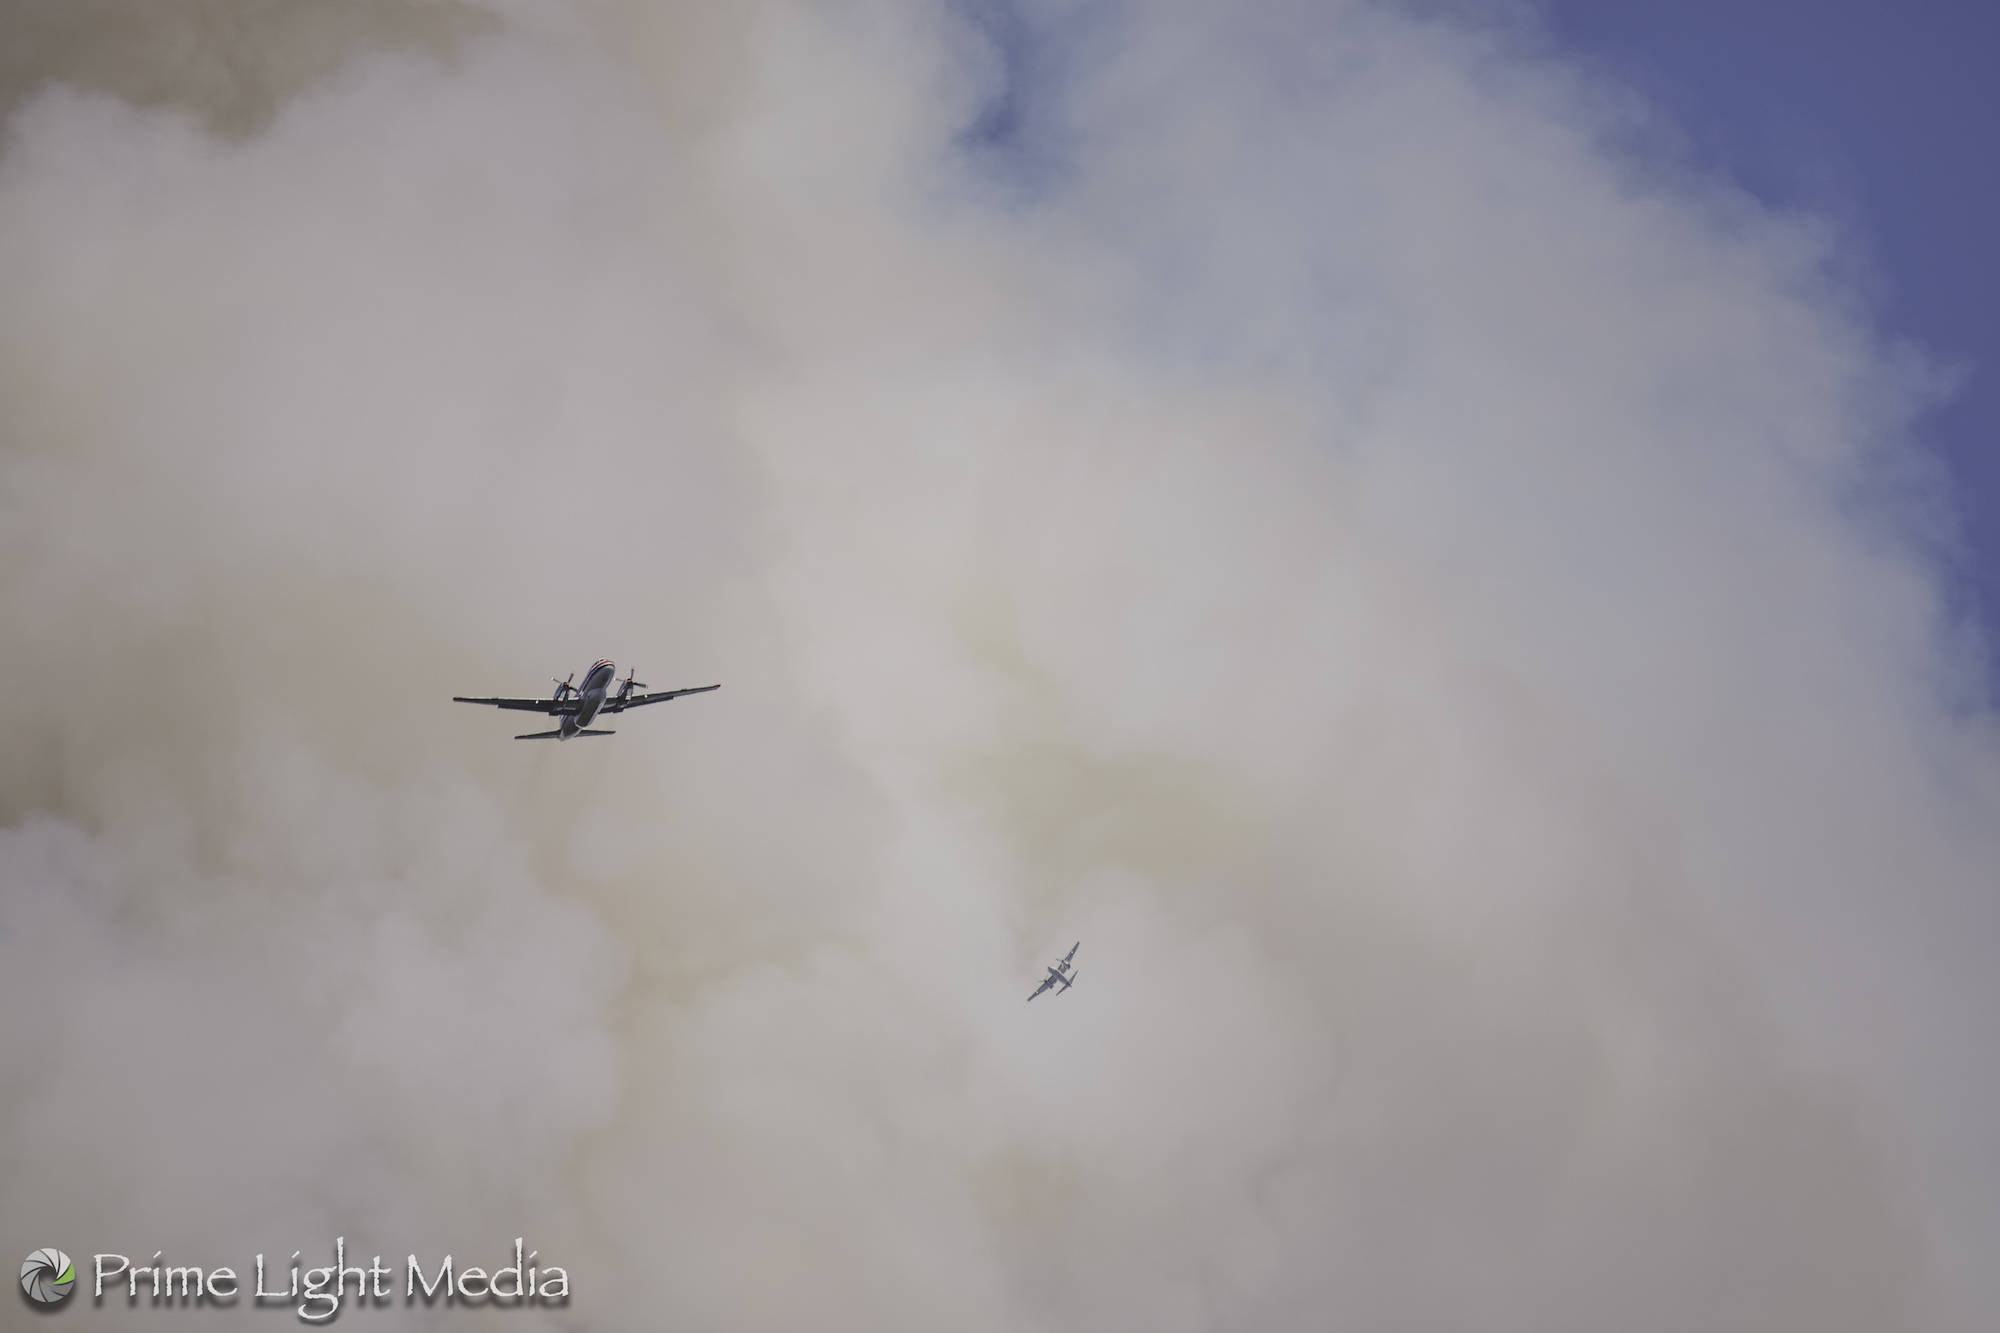 Photos of aircraft fighting the Joe Rich fire on Aug. 25, 2017. Image credit: Ethan Delichte from Prime Light Media